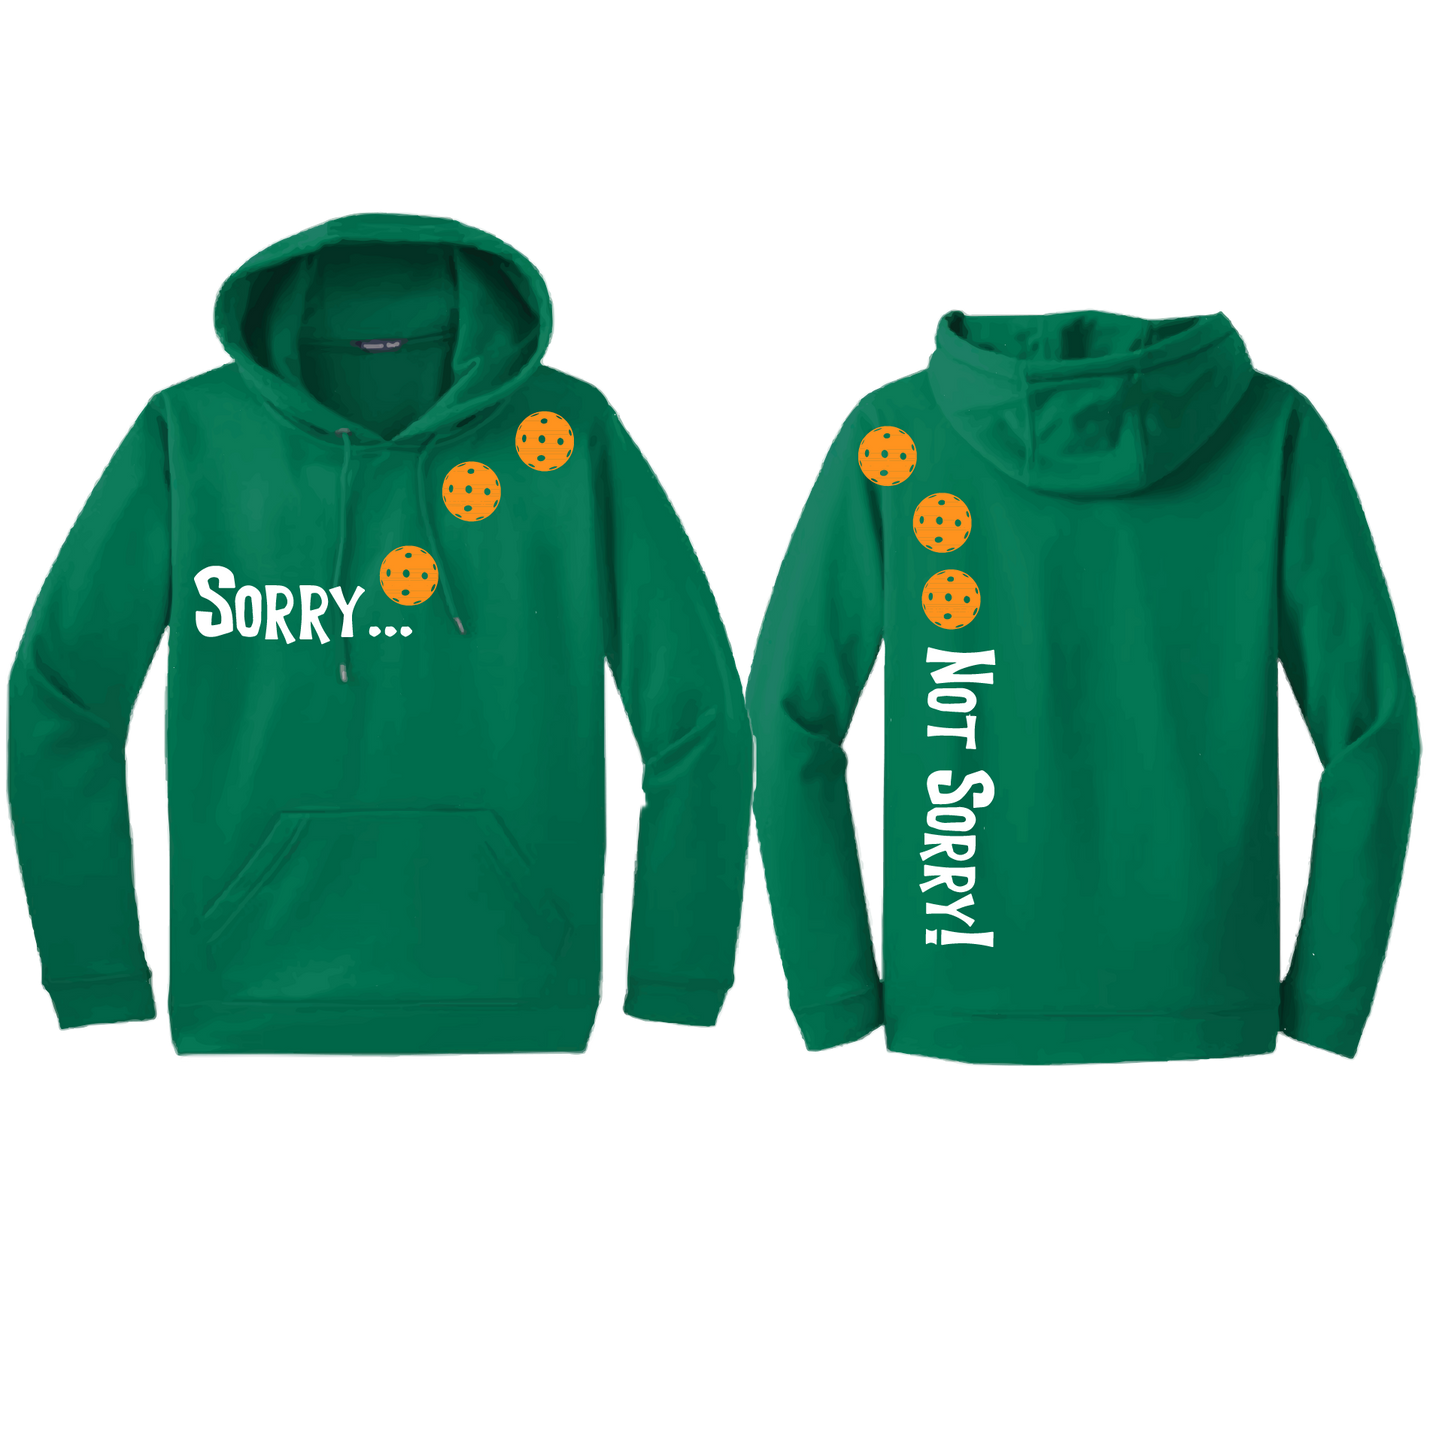 Design: Sorry...Not Sorry!!! with Customizable Ball Color: Choose: Cyan, Orange, Purple or Rainbow Unisex Hooded Sweatshirt: Moisture-wicking, double-lined hood, front pouch pocket. This unisex hooded sweatshirt is comfortable and soft. Stay warm on the Pickleball courts while being that hit with this one of kind design.